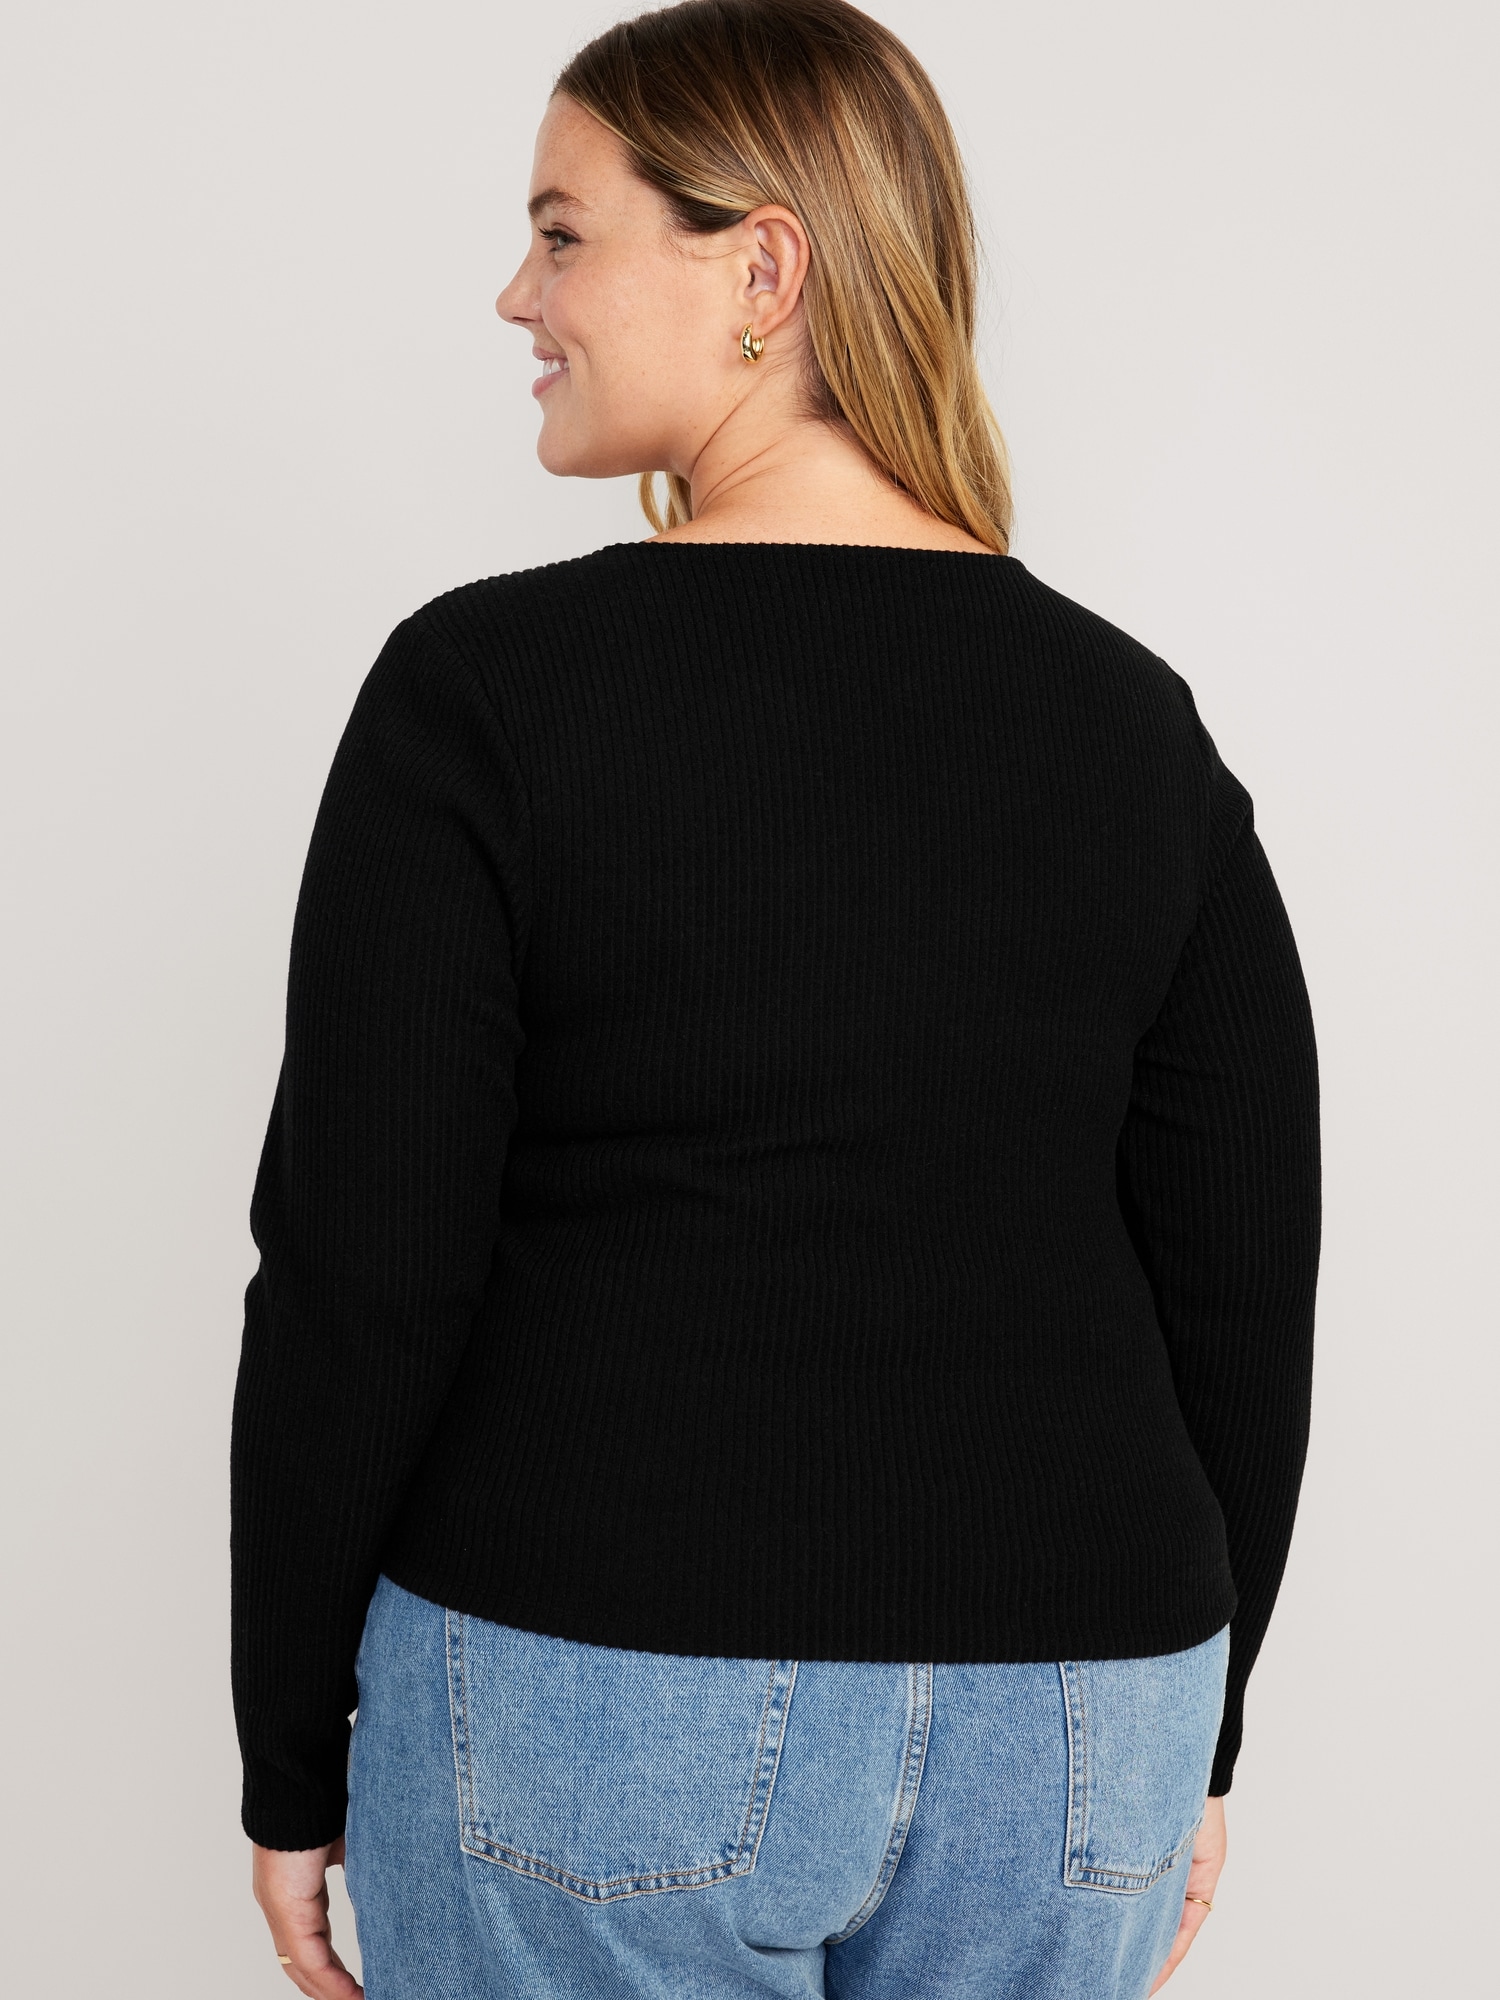 Fitted Long-Sleeve Strappy Top Old for Navy Women | Keyhole